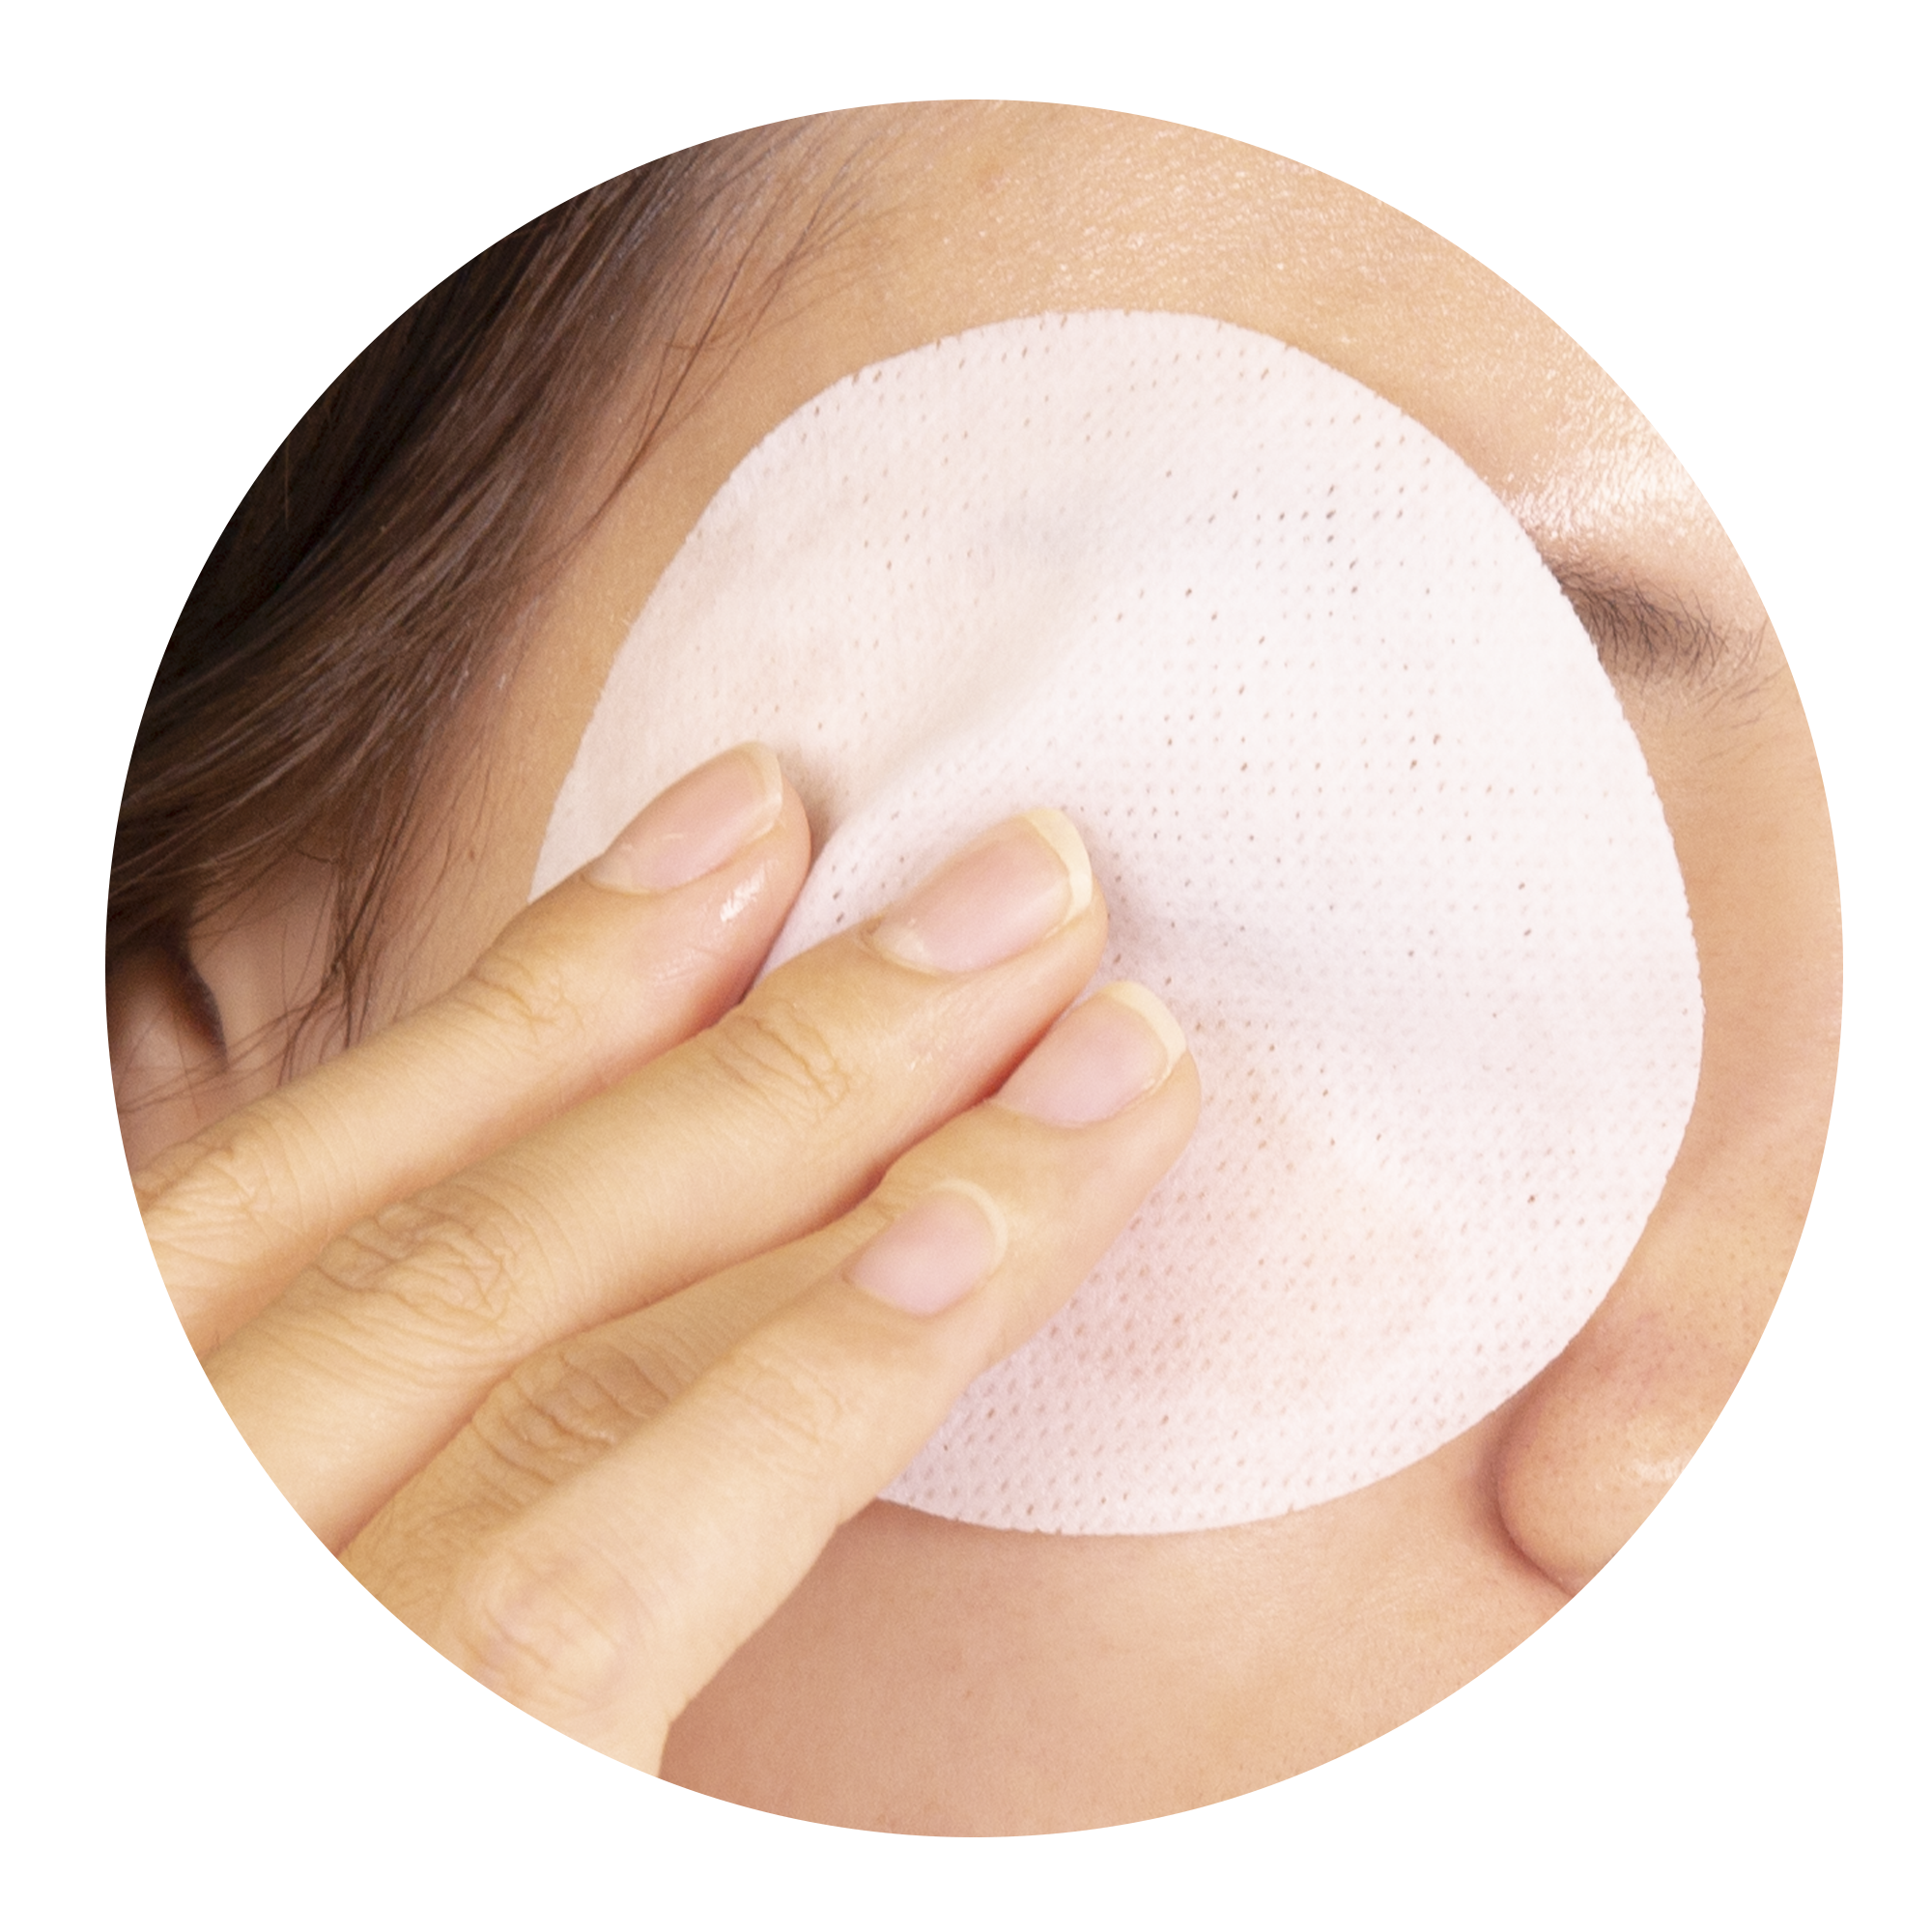 RE:P. Gentle Face Cleaning Remover Pad (CLEAN BEAUTY) -70pads